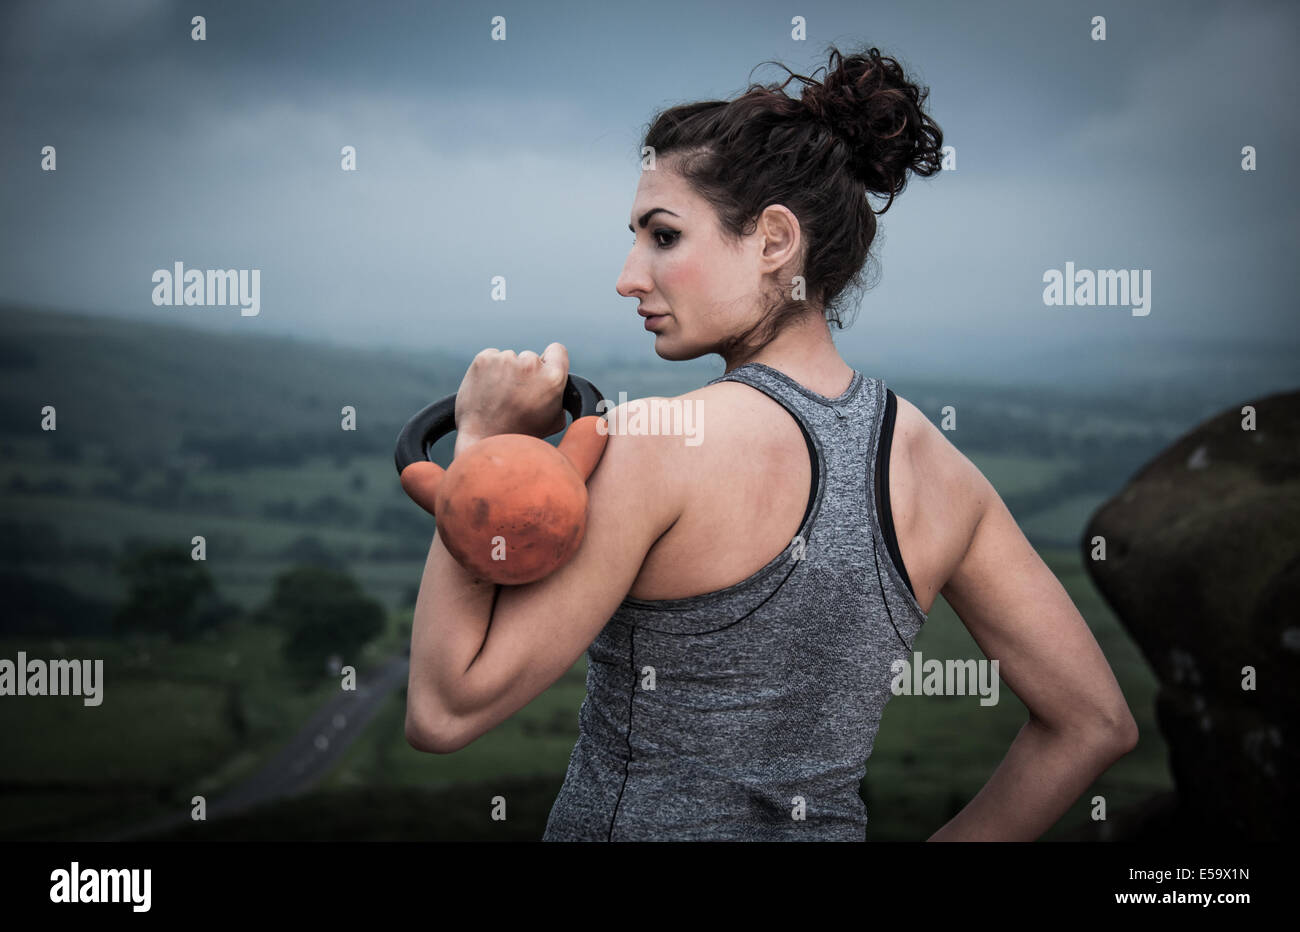 Woman with kettle bell practicing outdoor fitness Stock Photo